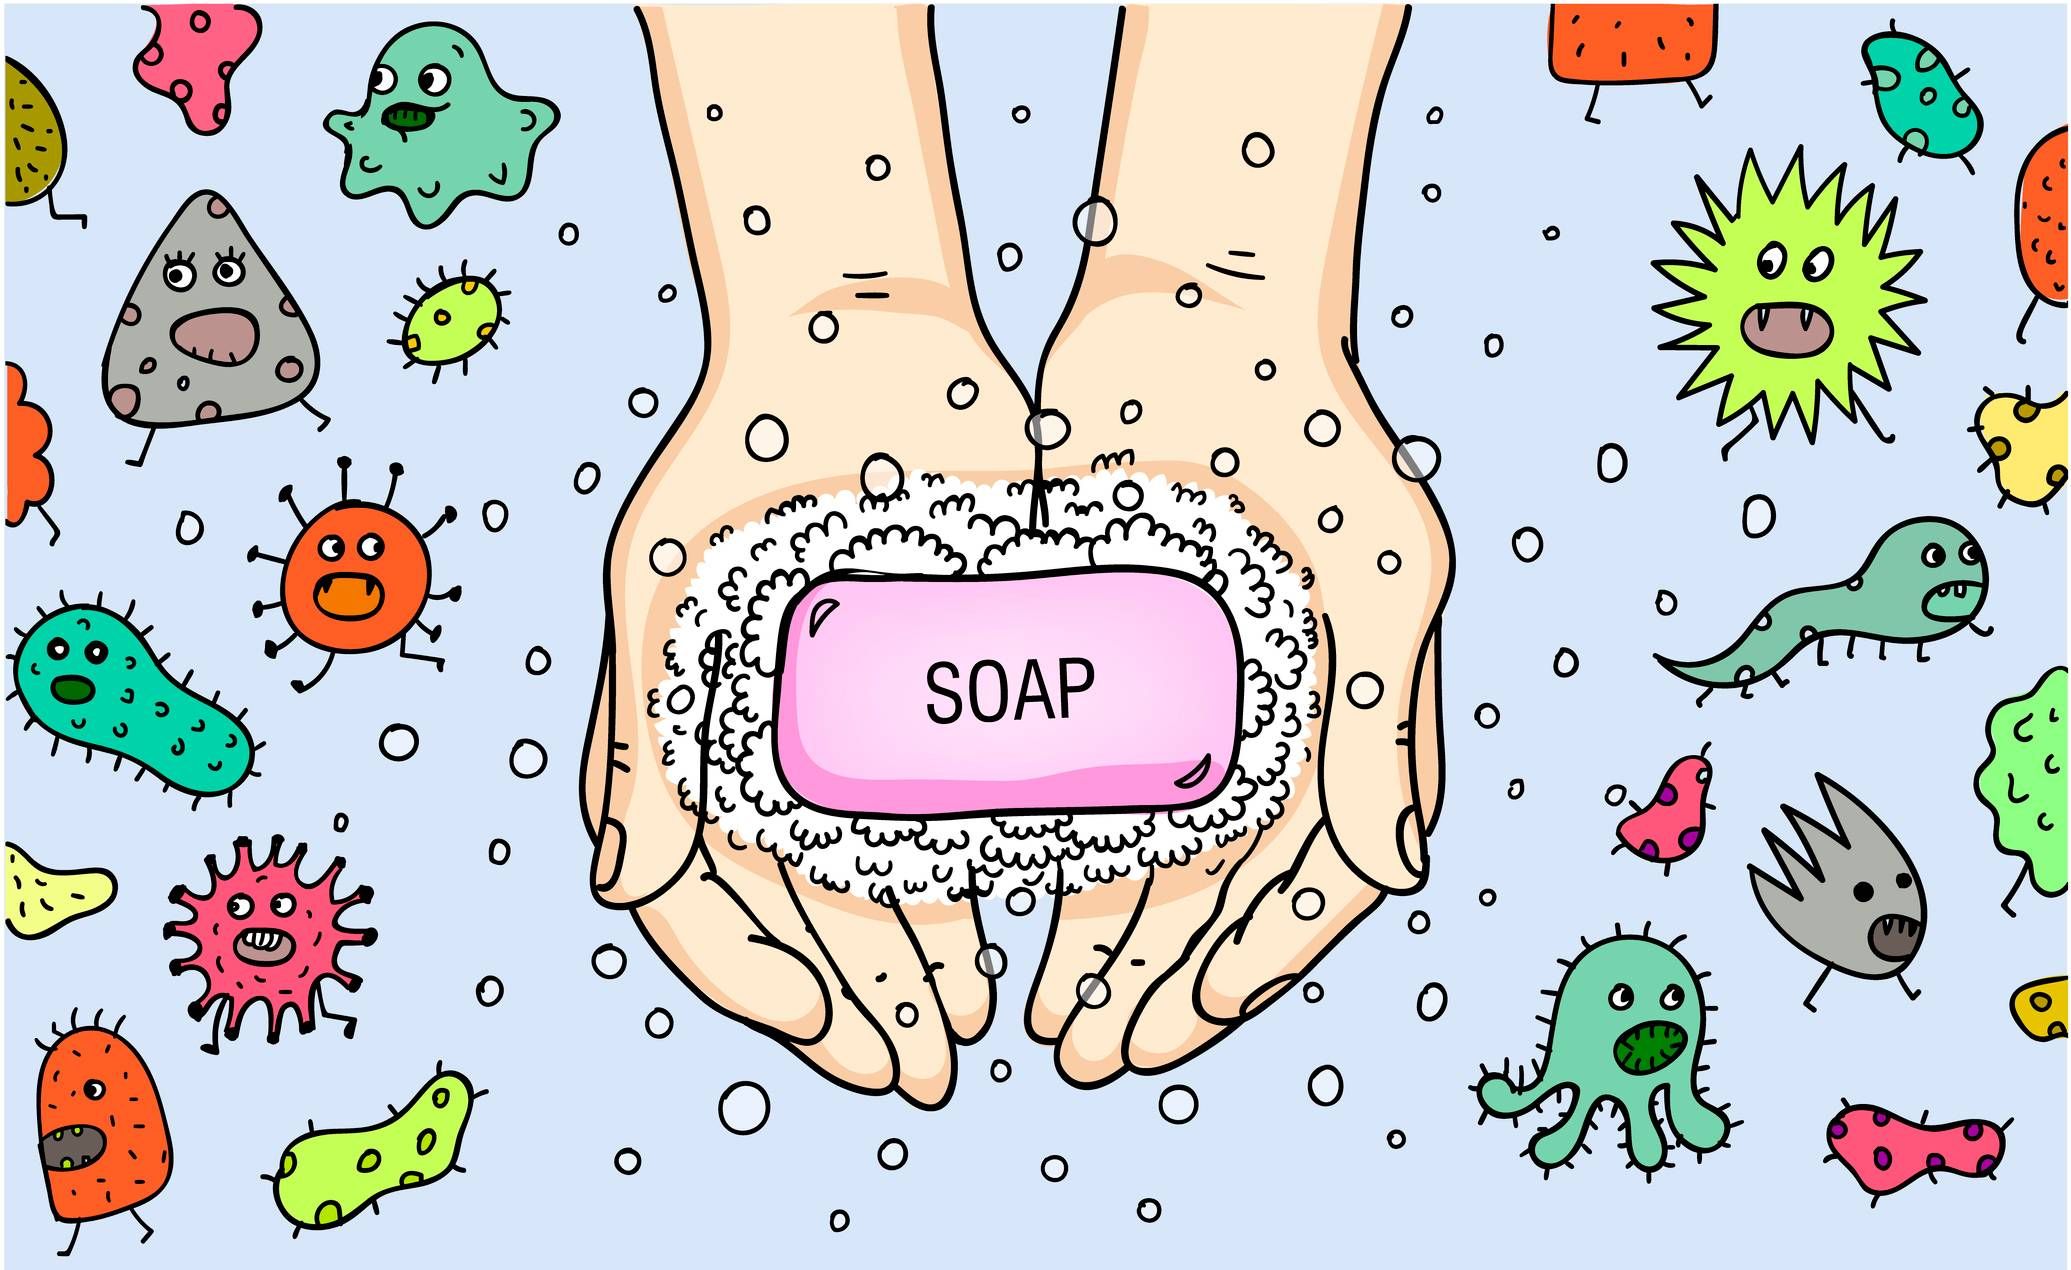 Soap, water and a little bit of scrubbing are so important to stopping the spread of viruses.